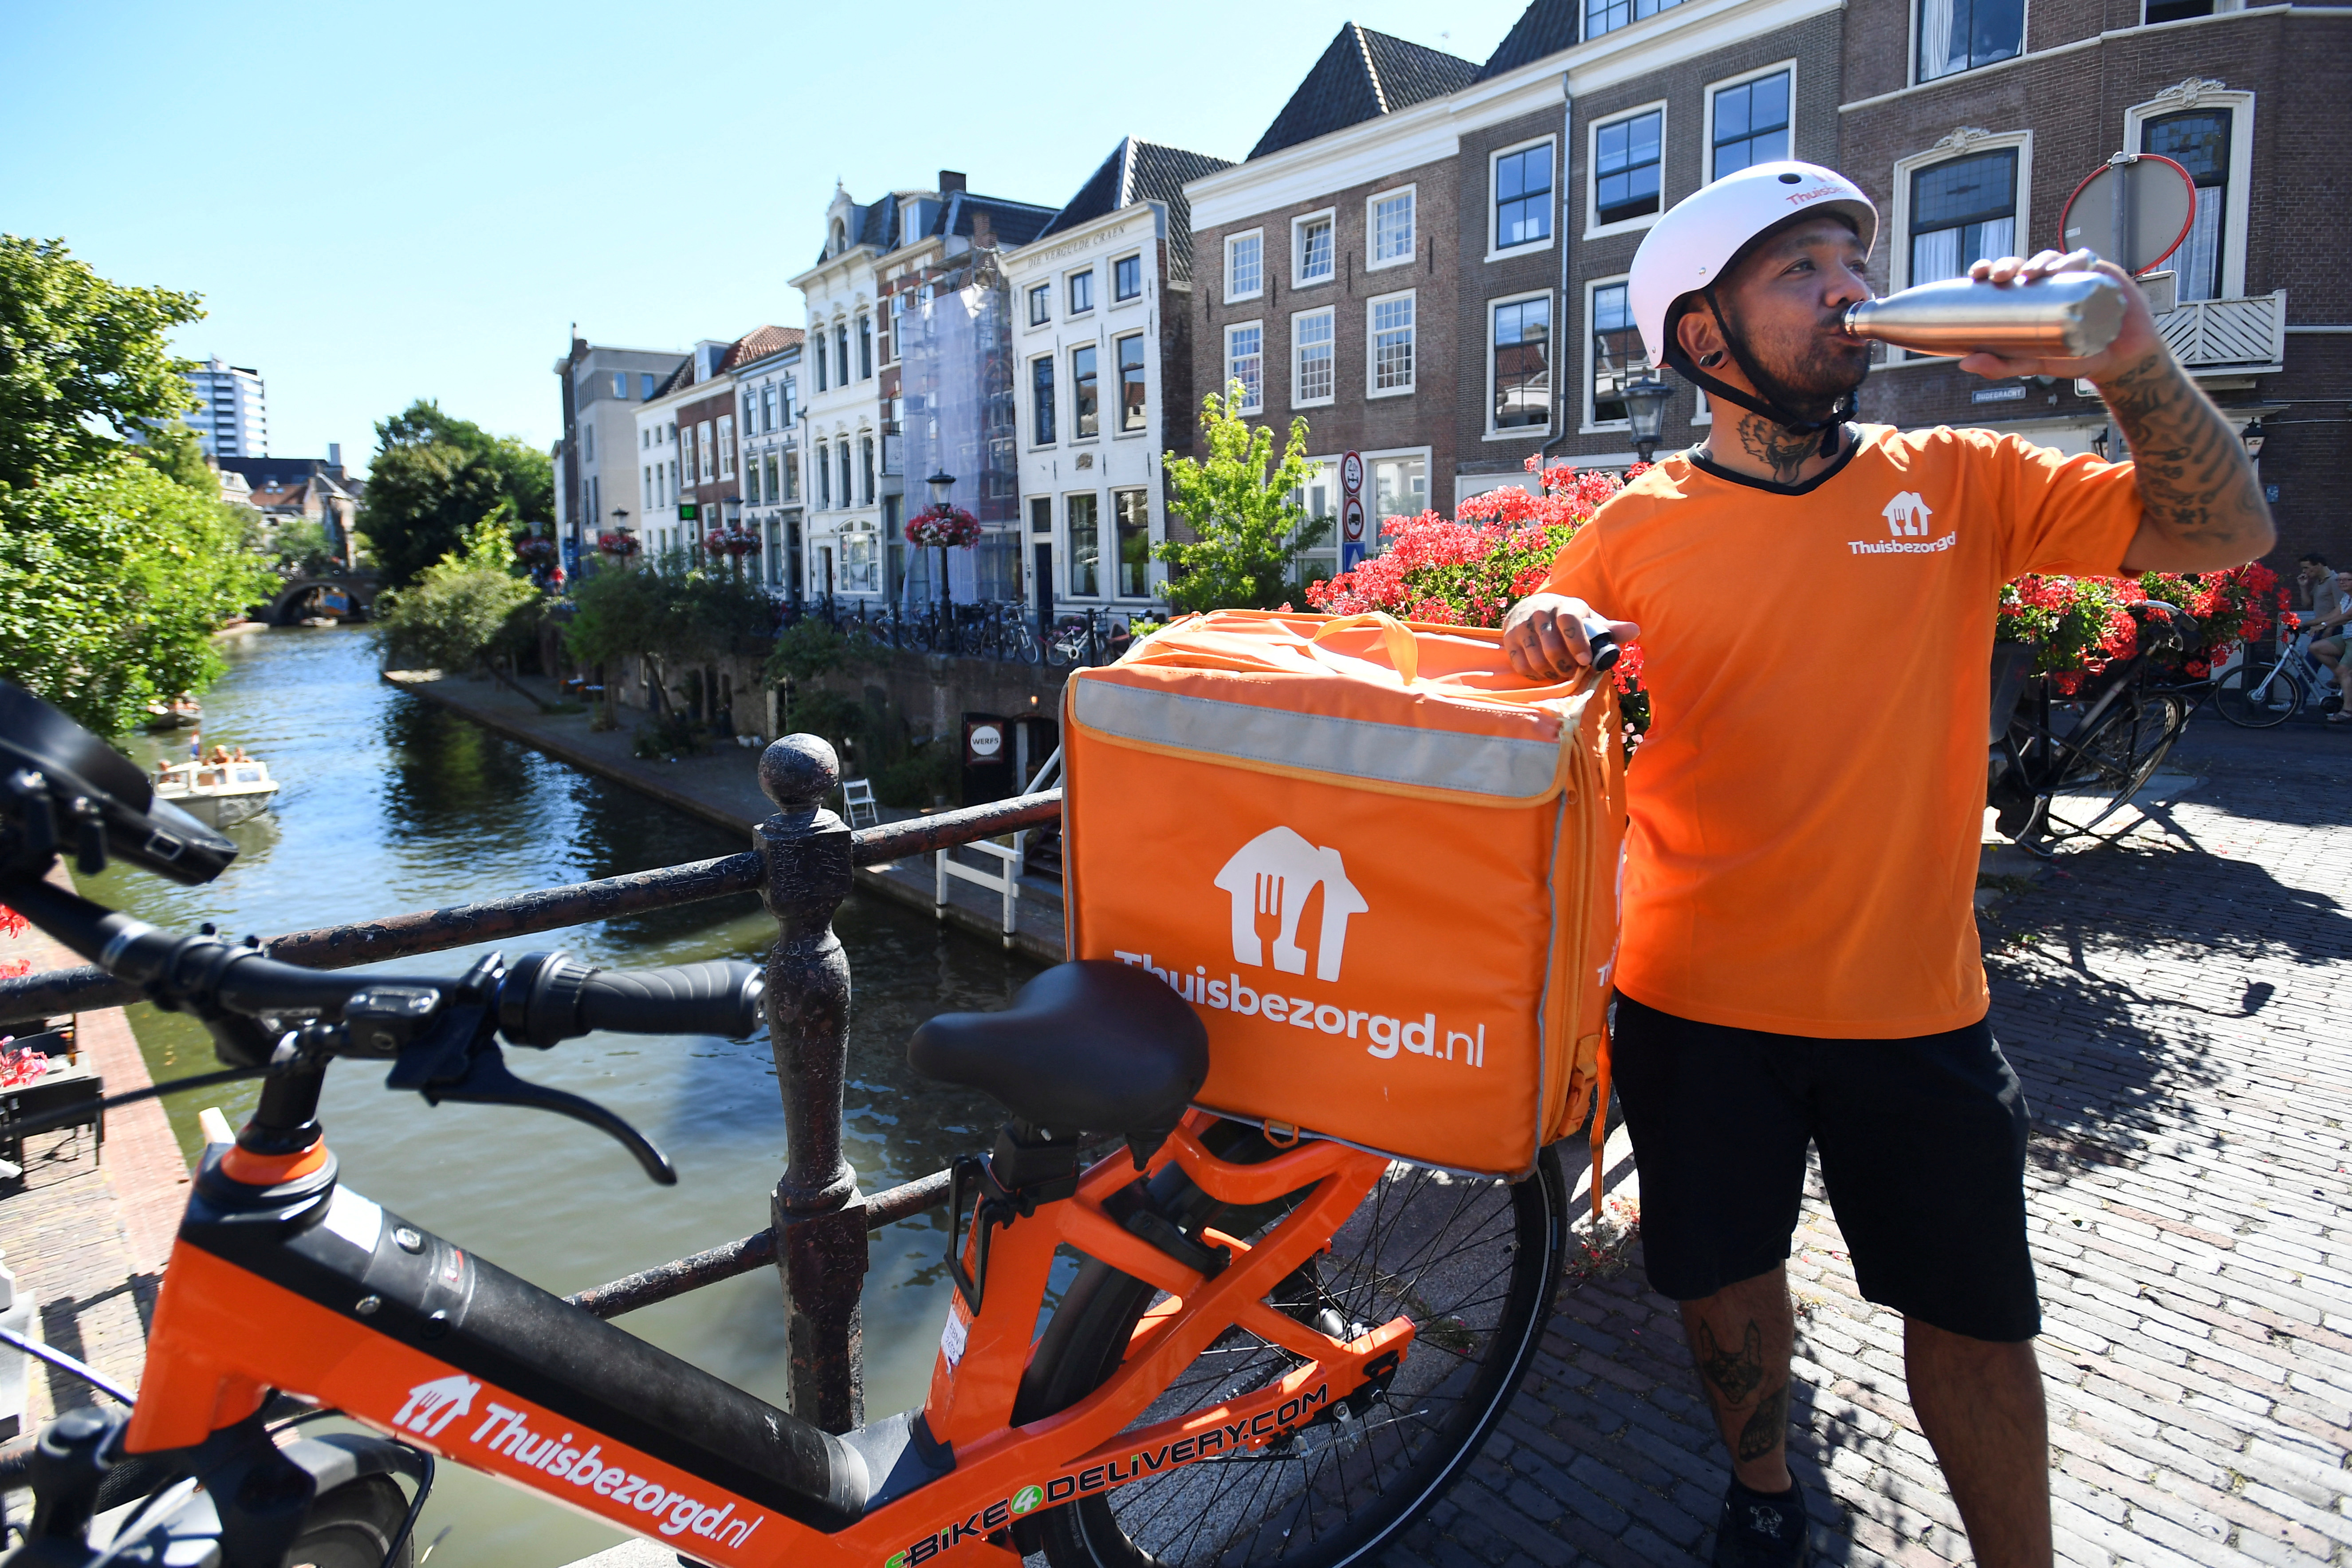 Bicycle courier Edward James Morta from Takeaway drinks water during the heatwave in Utrecht